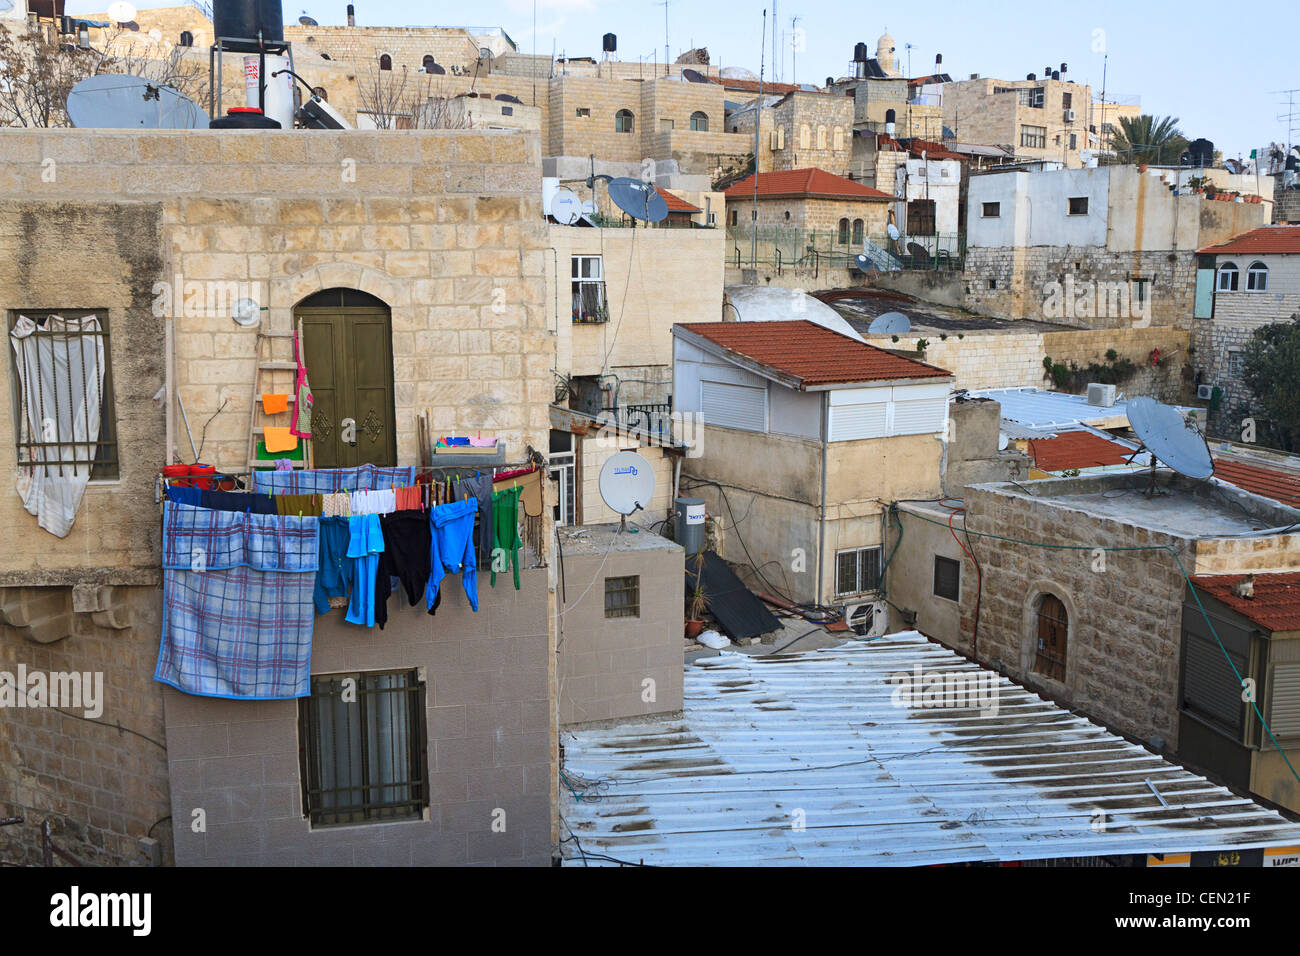 View of wash hanging to dry in the Old City of Jerusalem, Israel Stock Photo